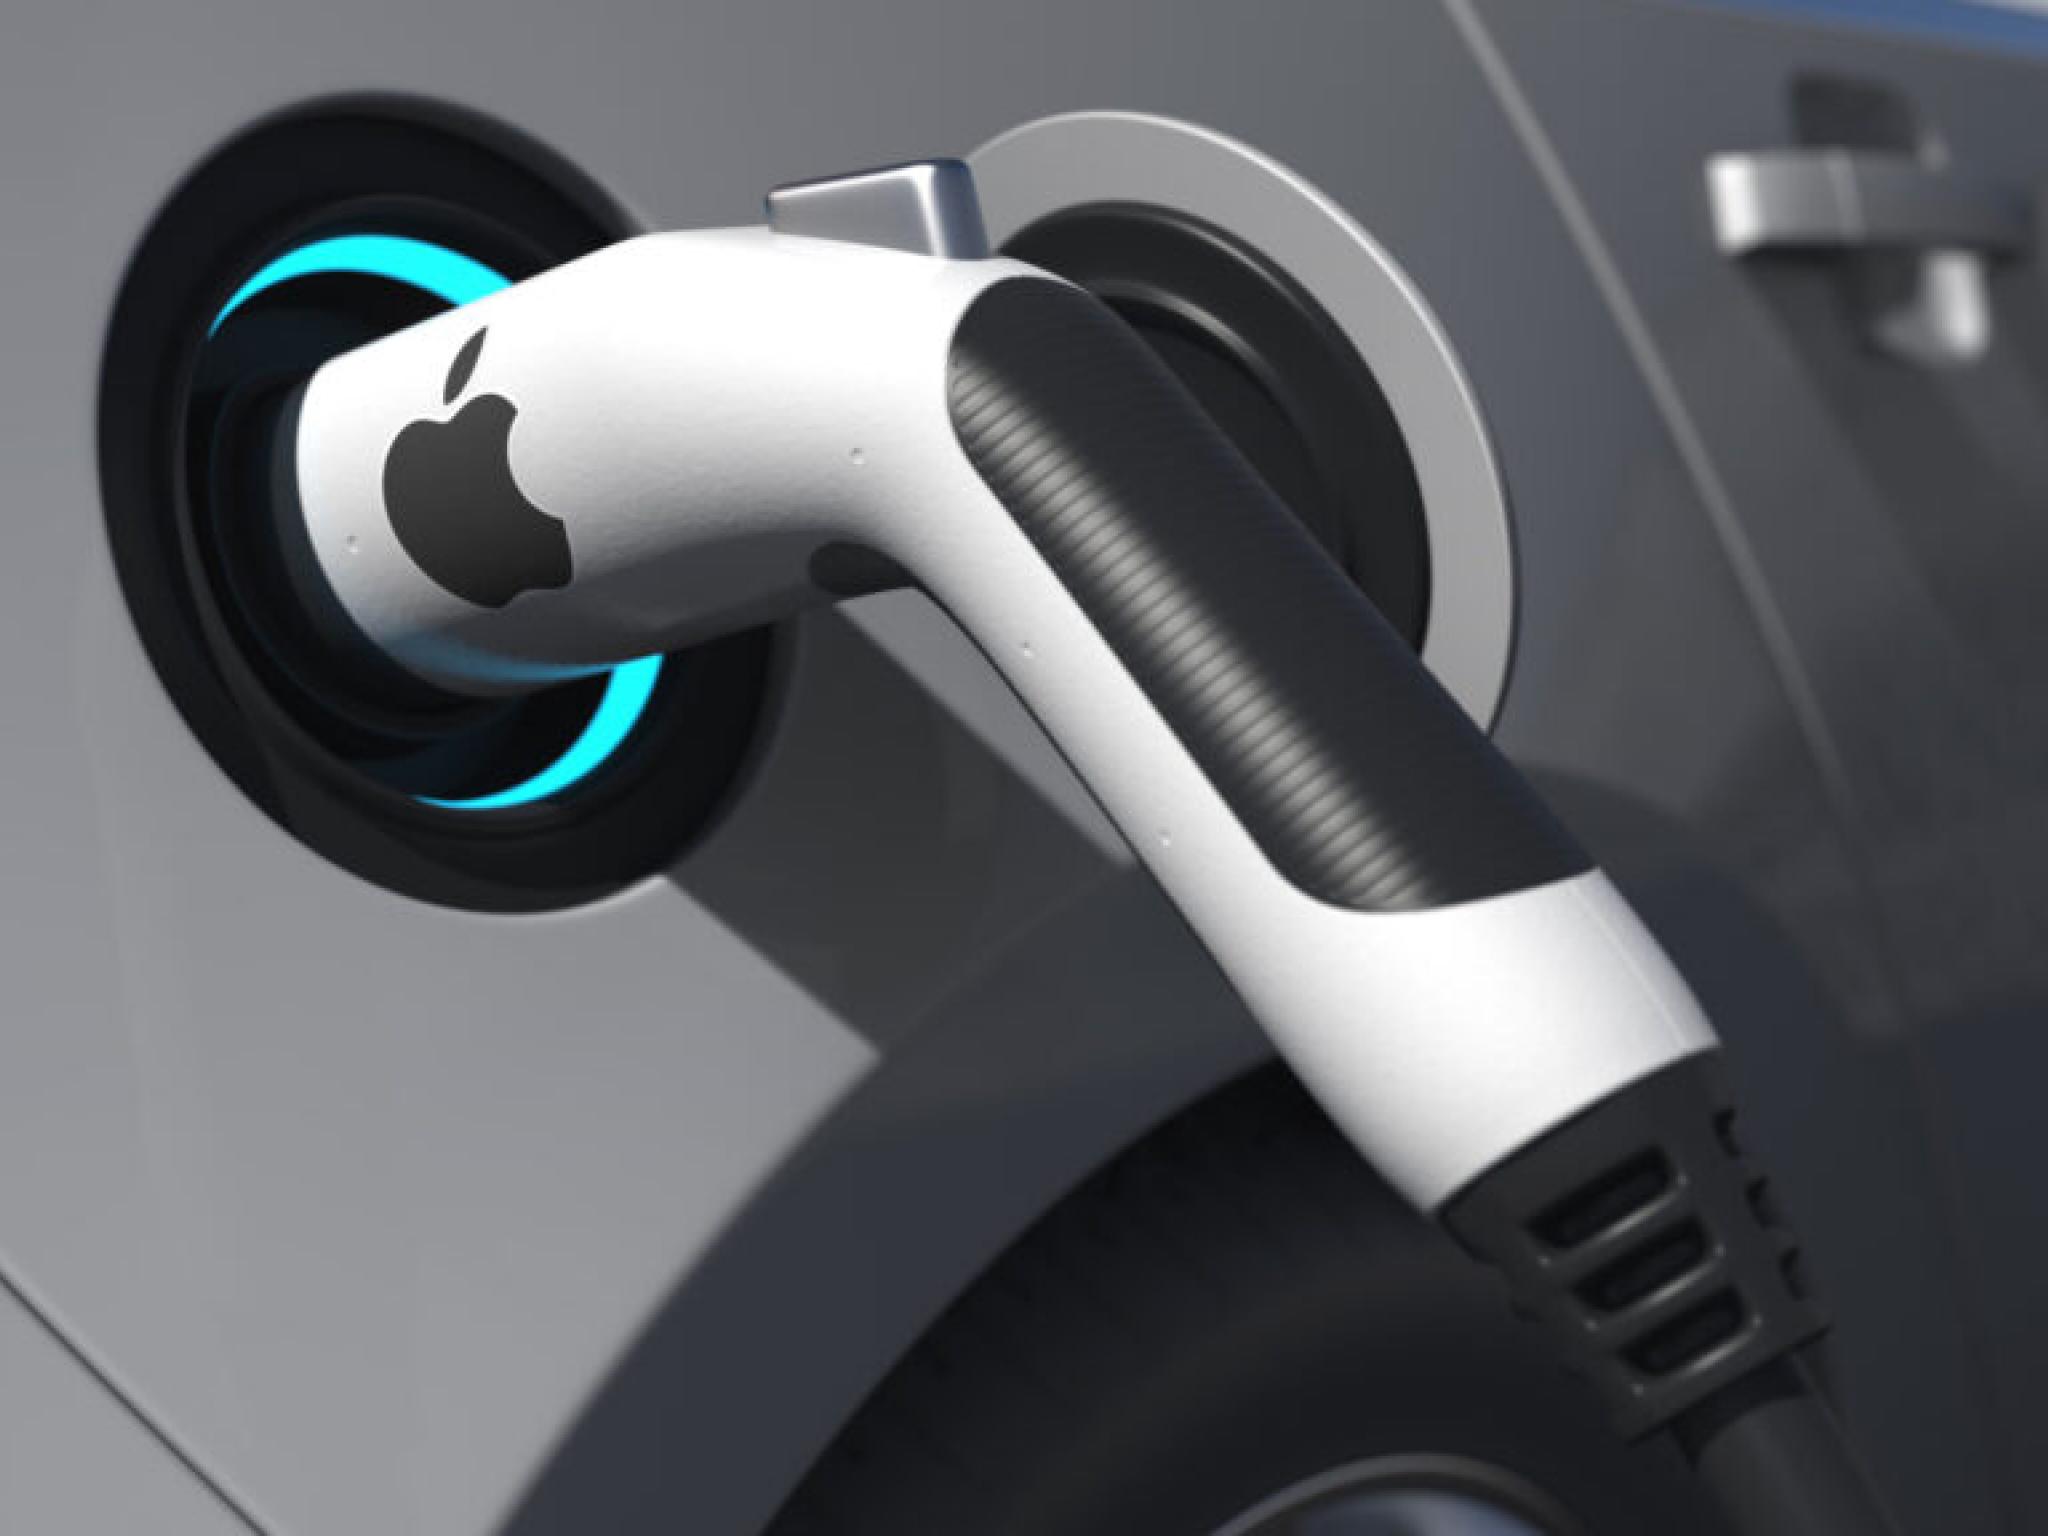  apple-abandons-electric-car-project-to-focus-on-generative-ai 